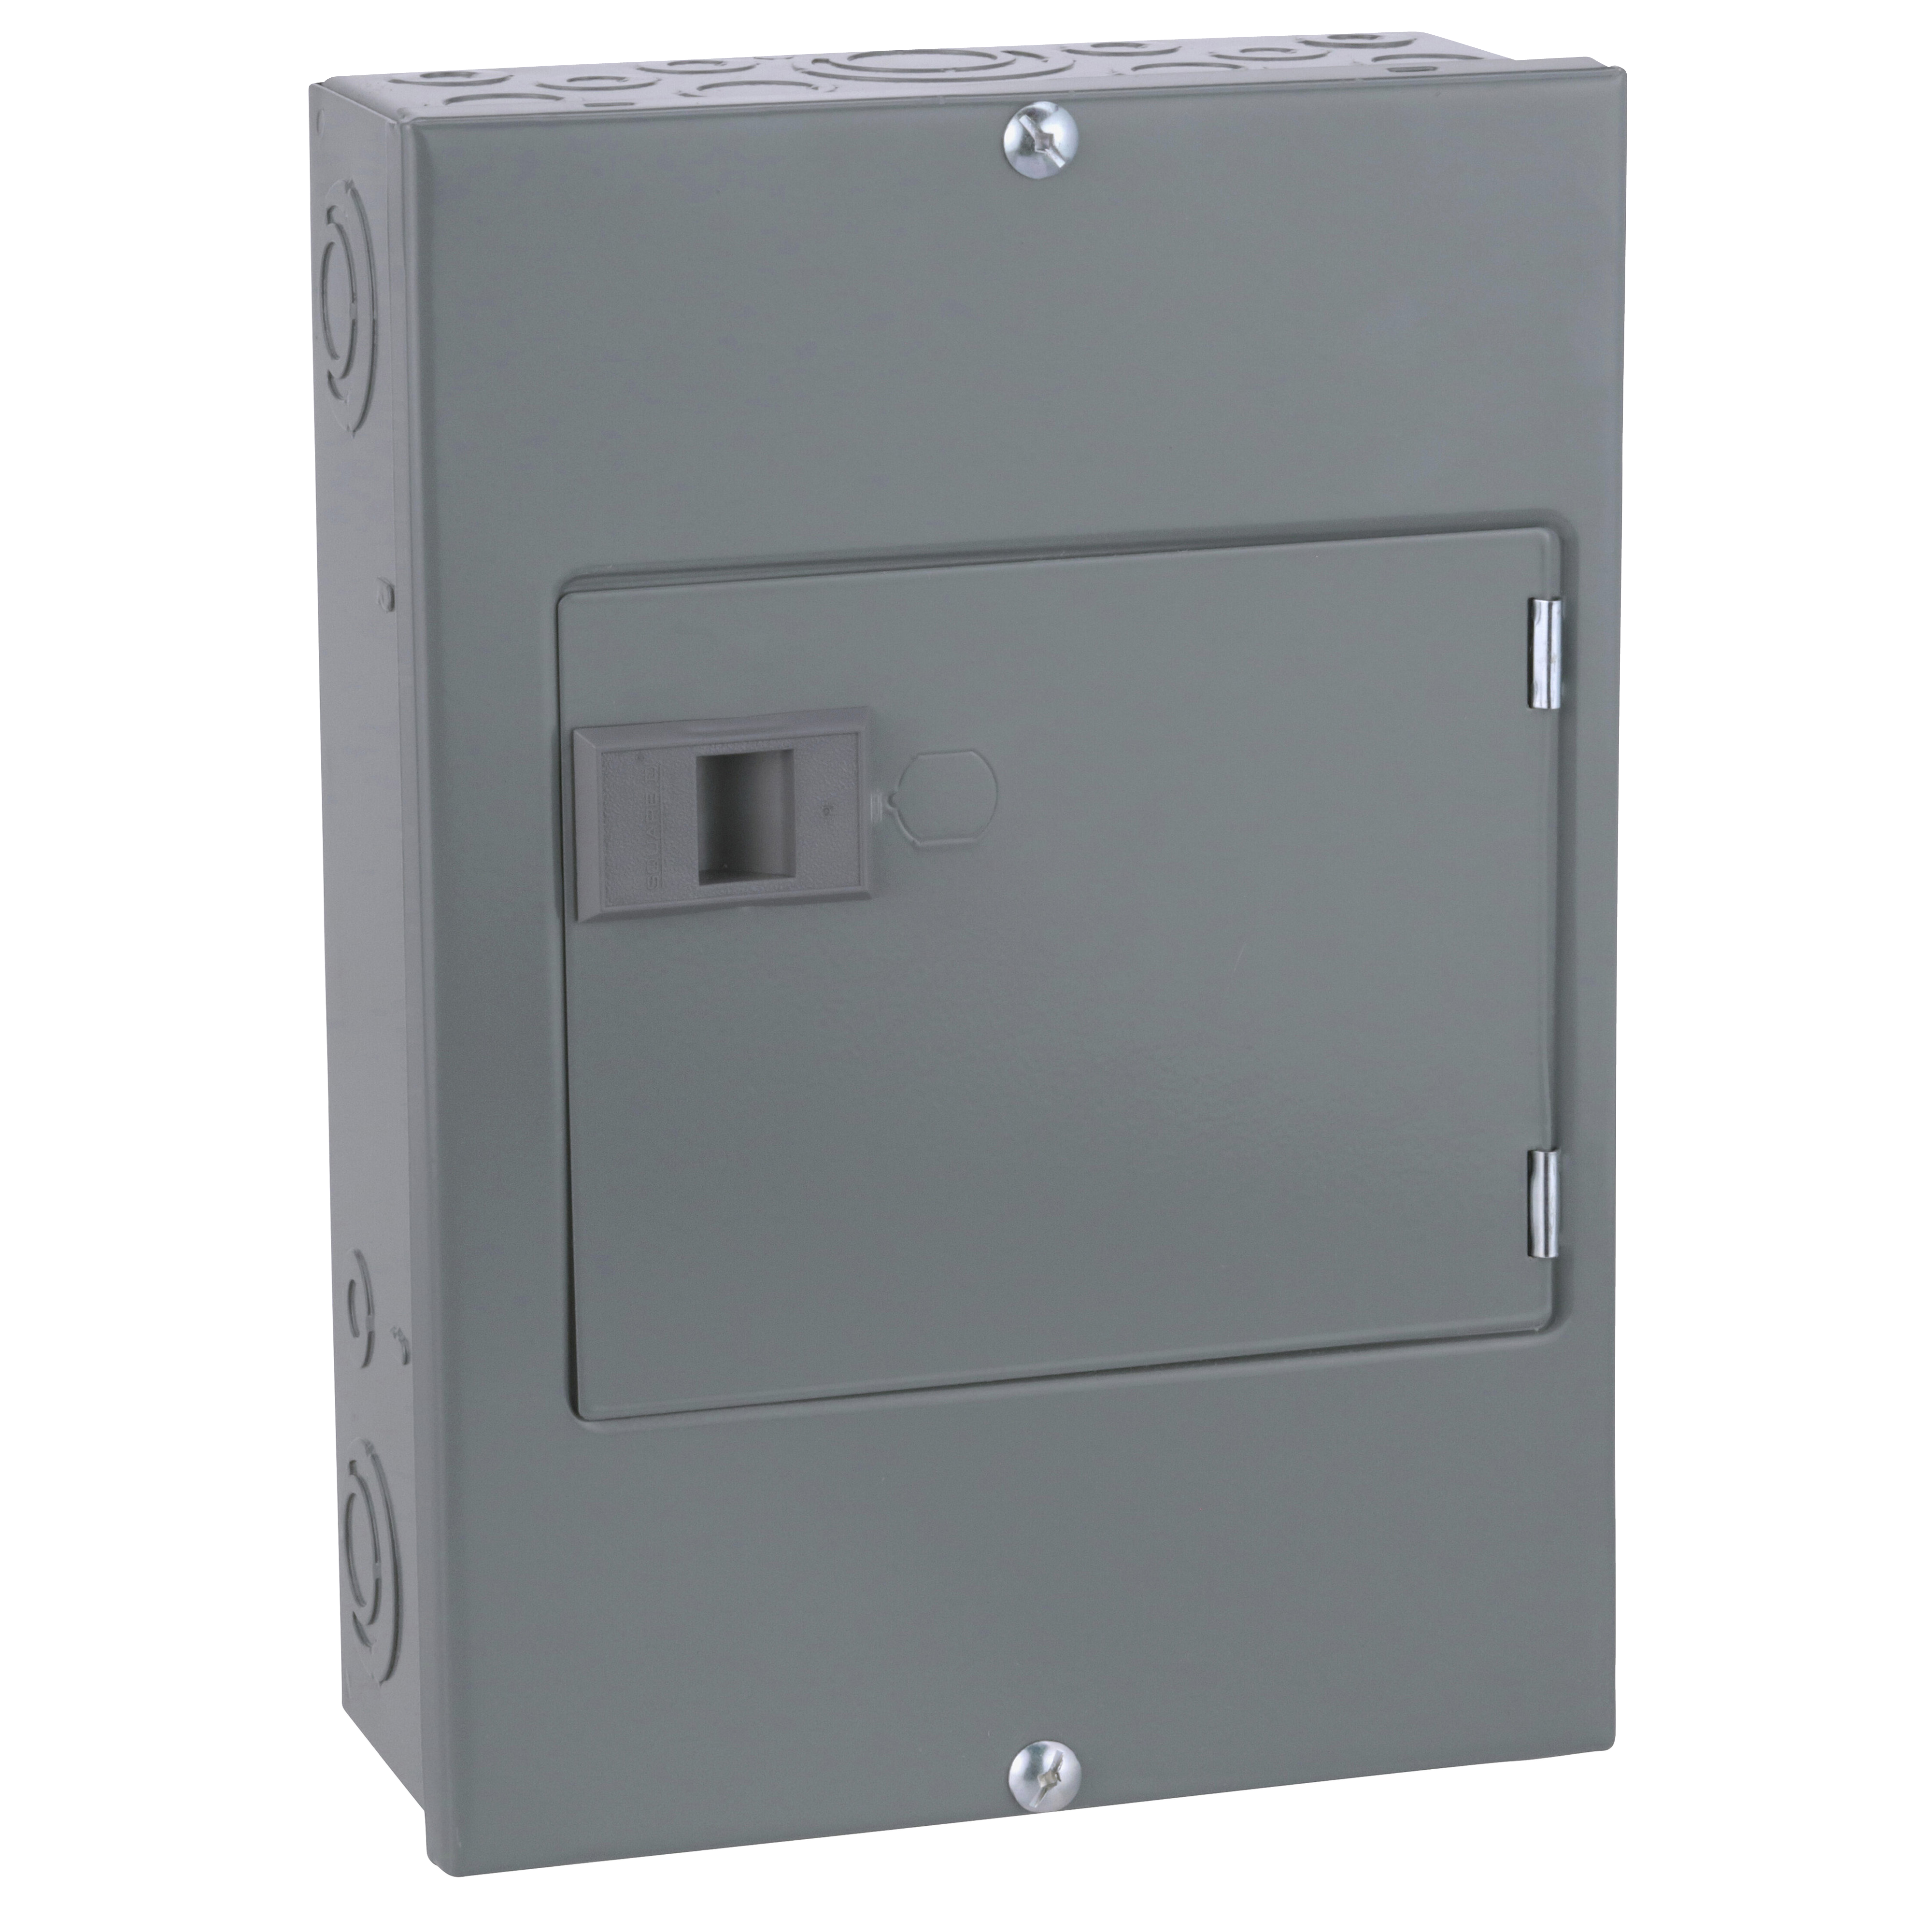 Load center, QO, 1 phase, 8 spaces, 16 circuits, 100A fixed main lugs, NEMA1, door surface cover, UL